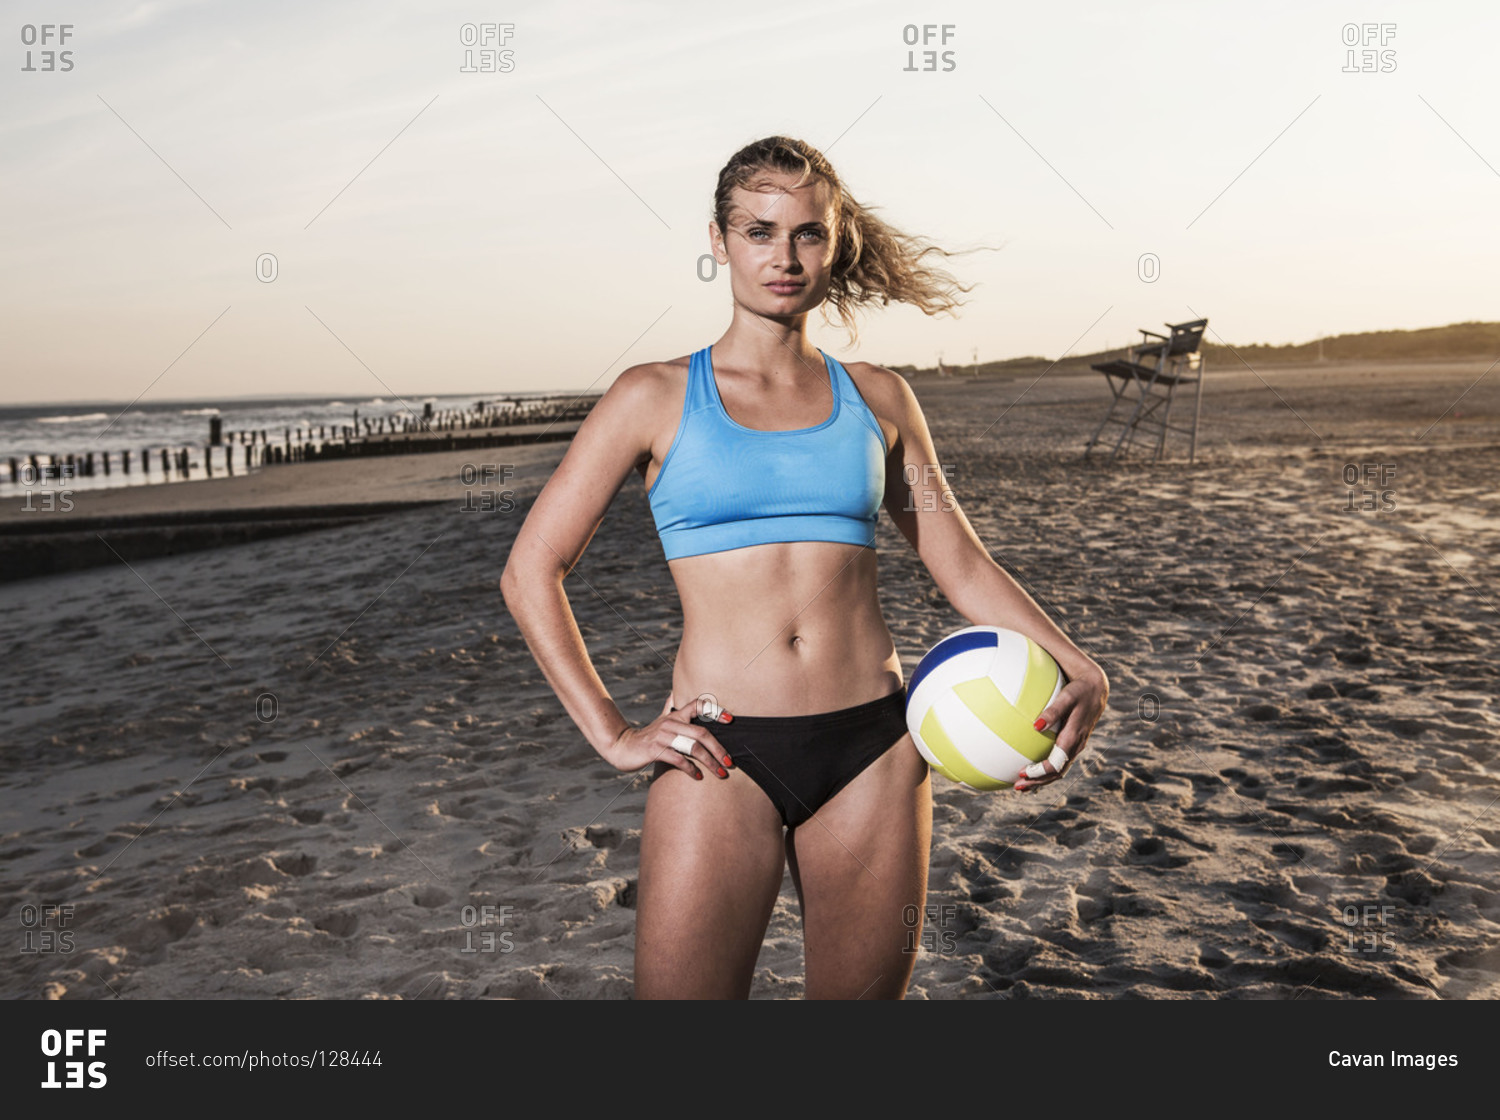 Volleyball player holding a ball on a sandy beach